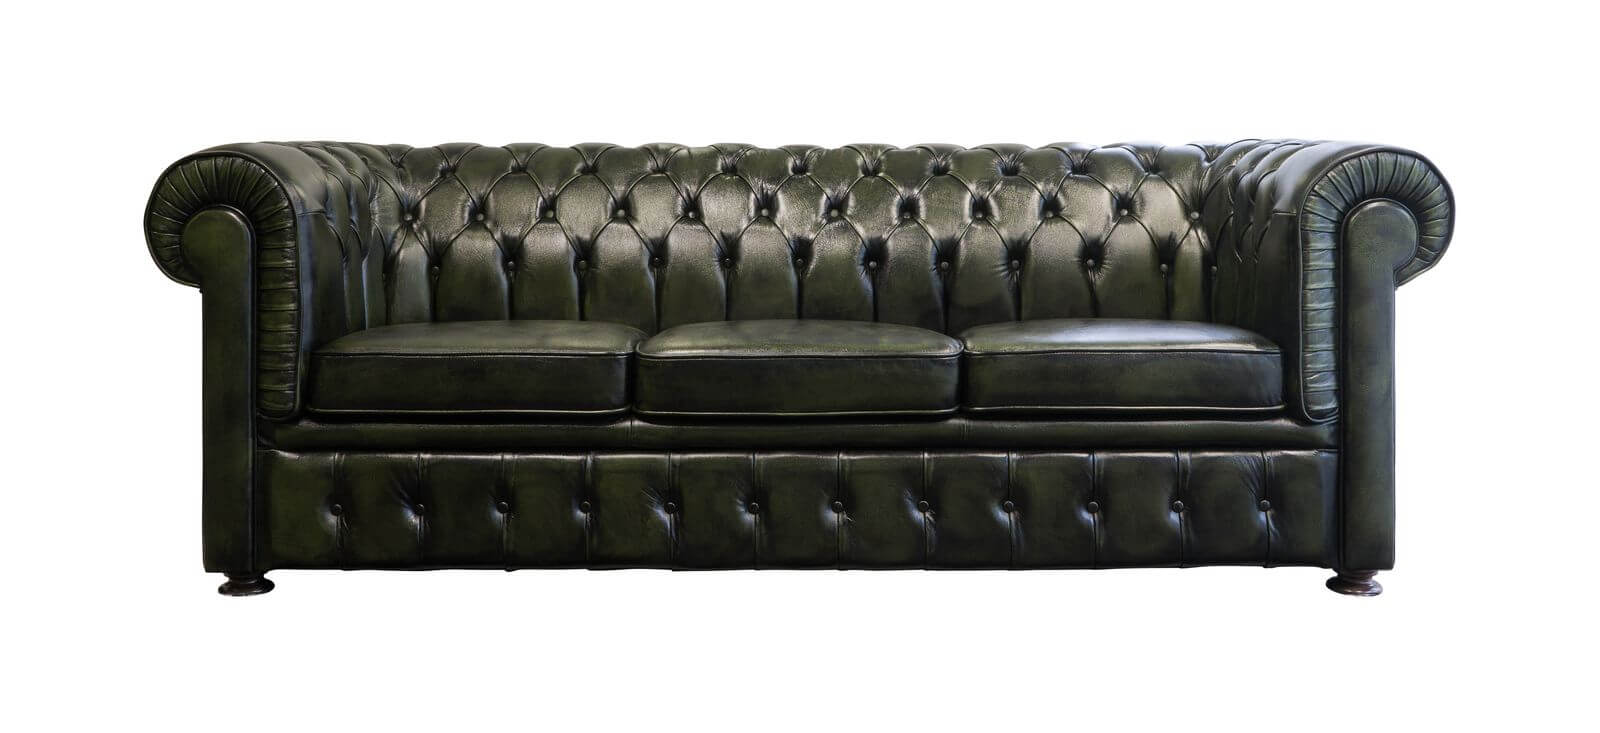 Classic 3 szemelyes chesterfield zold kanape